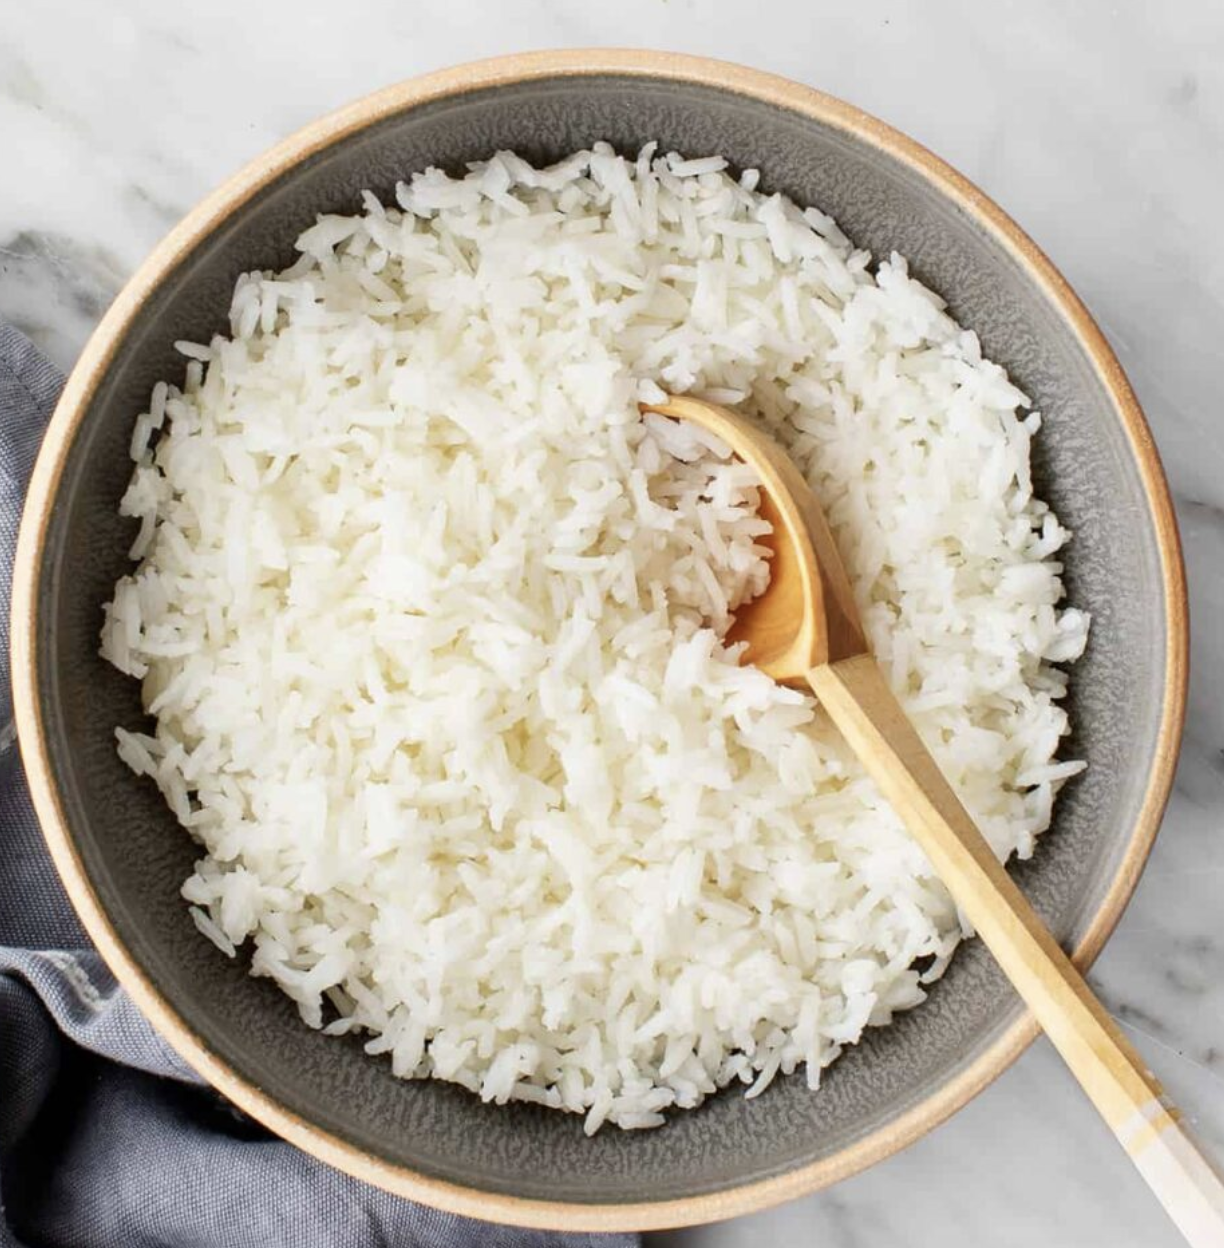 Elevate Your Rice: Tips for Flavorful and Tasty Meals